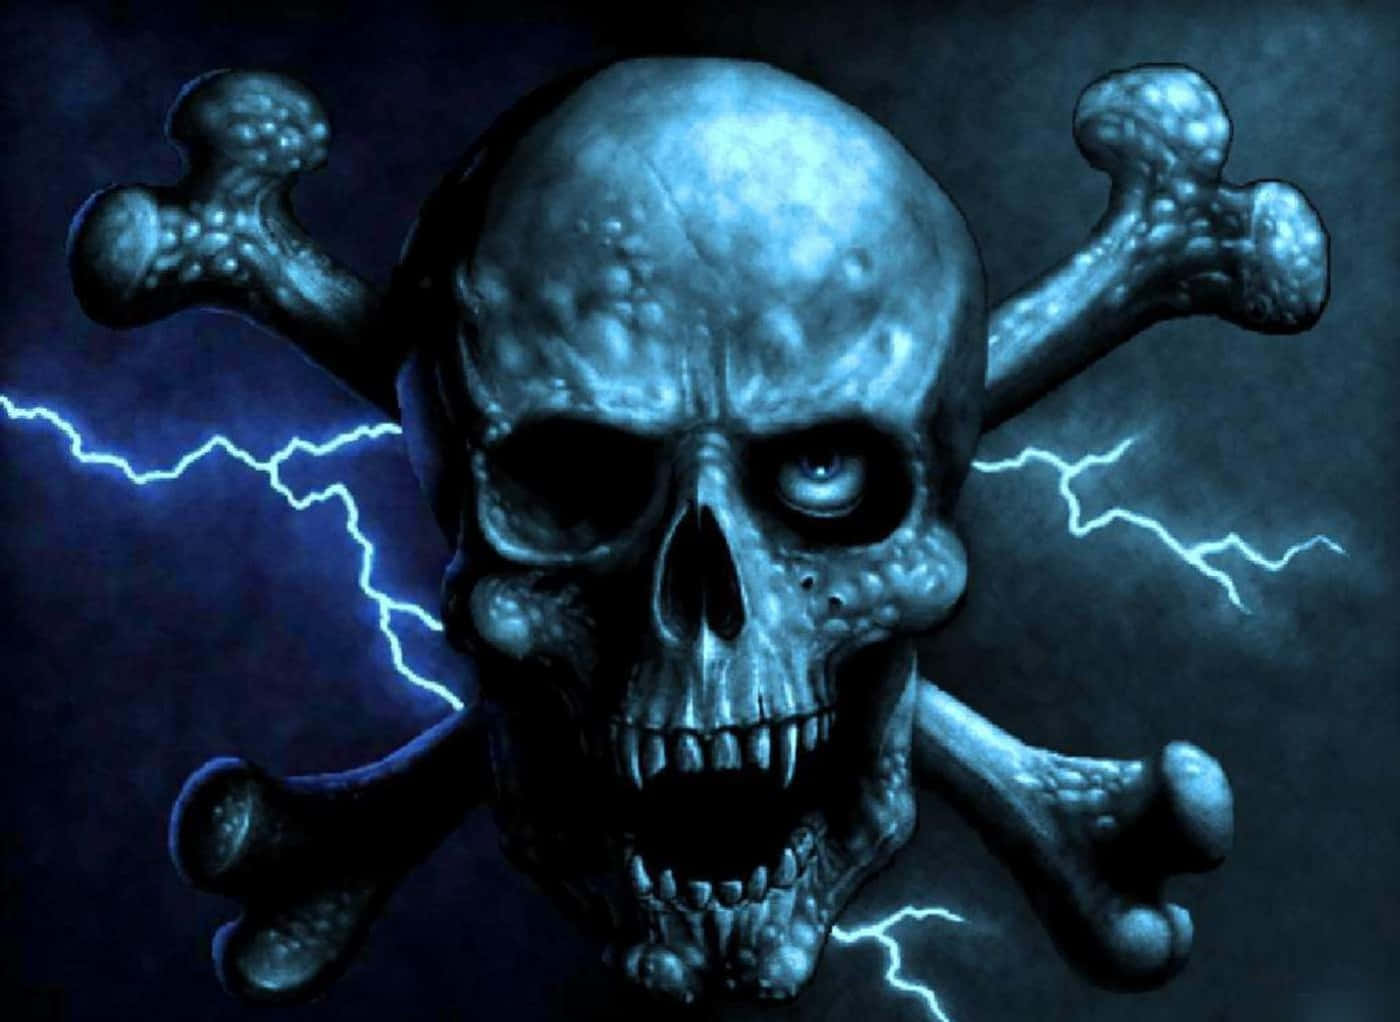 A Skull With Lightning Bolts On It